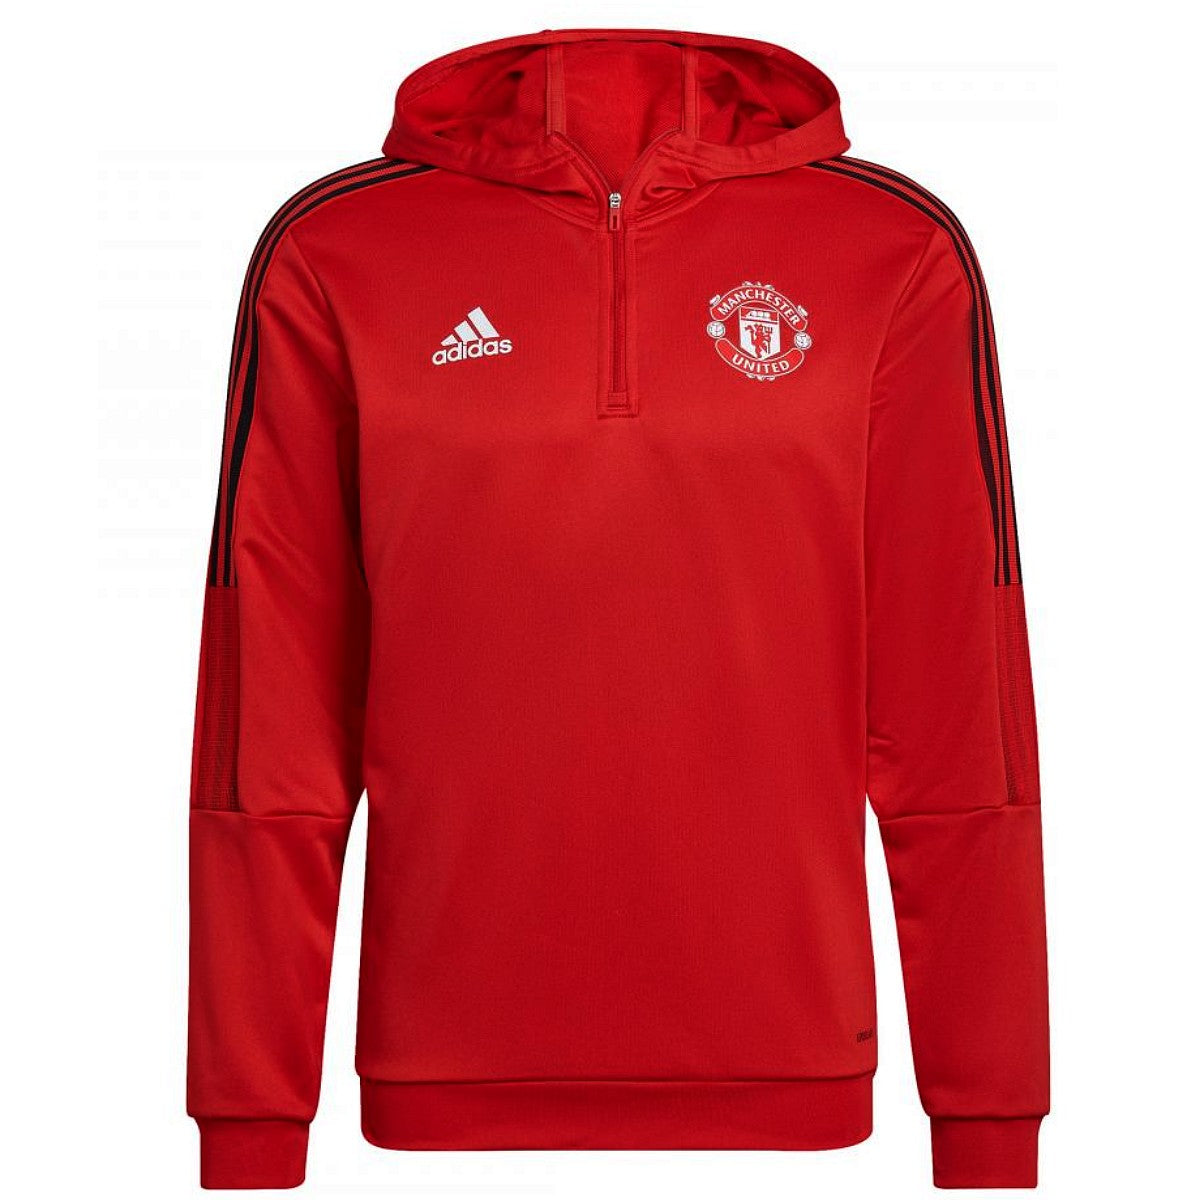 fund glass City adidas tracksuit price south africa album semiconductor ...